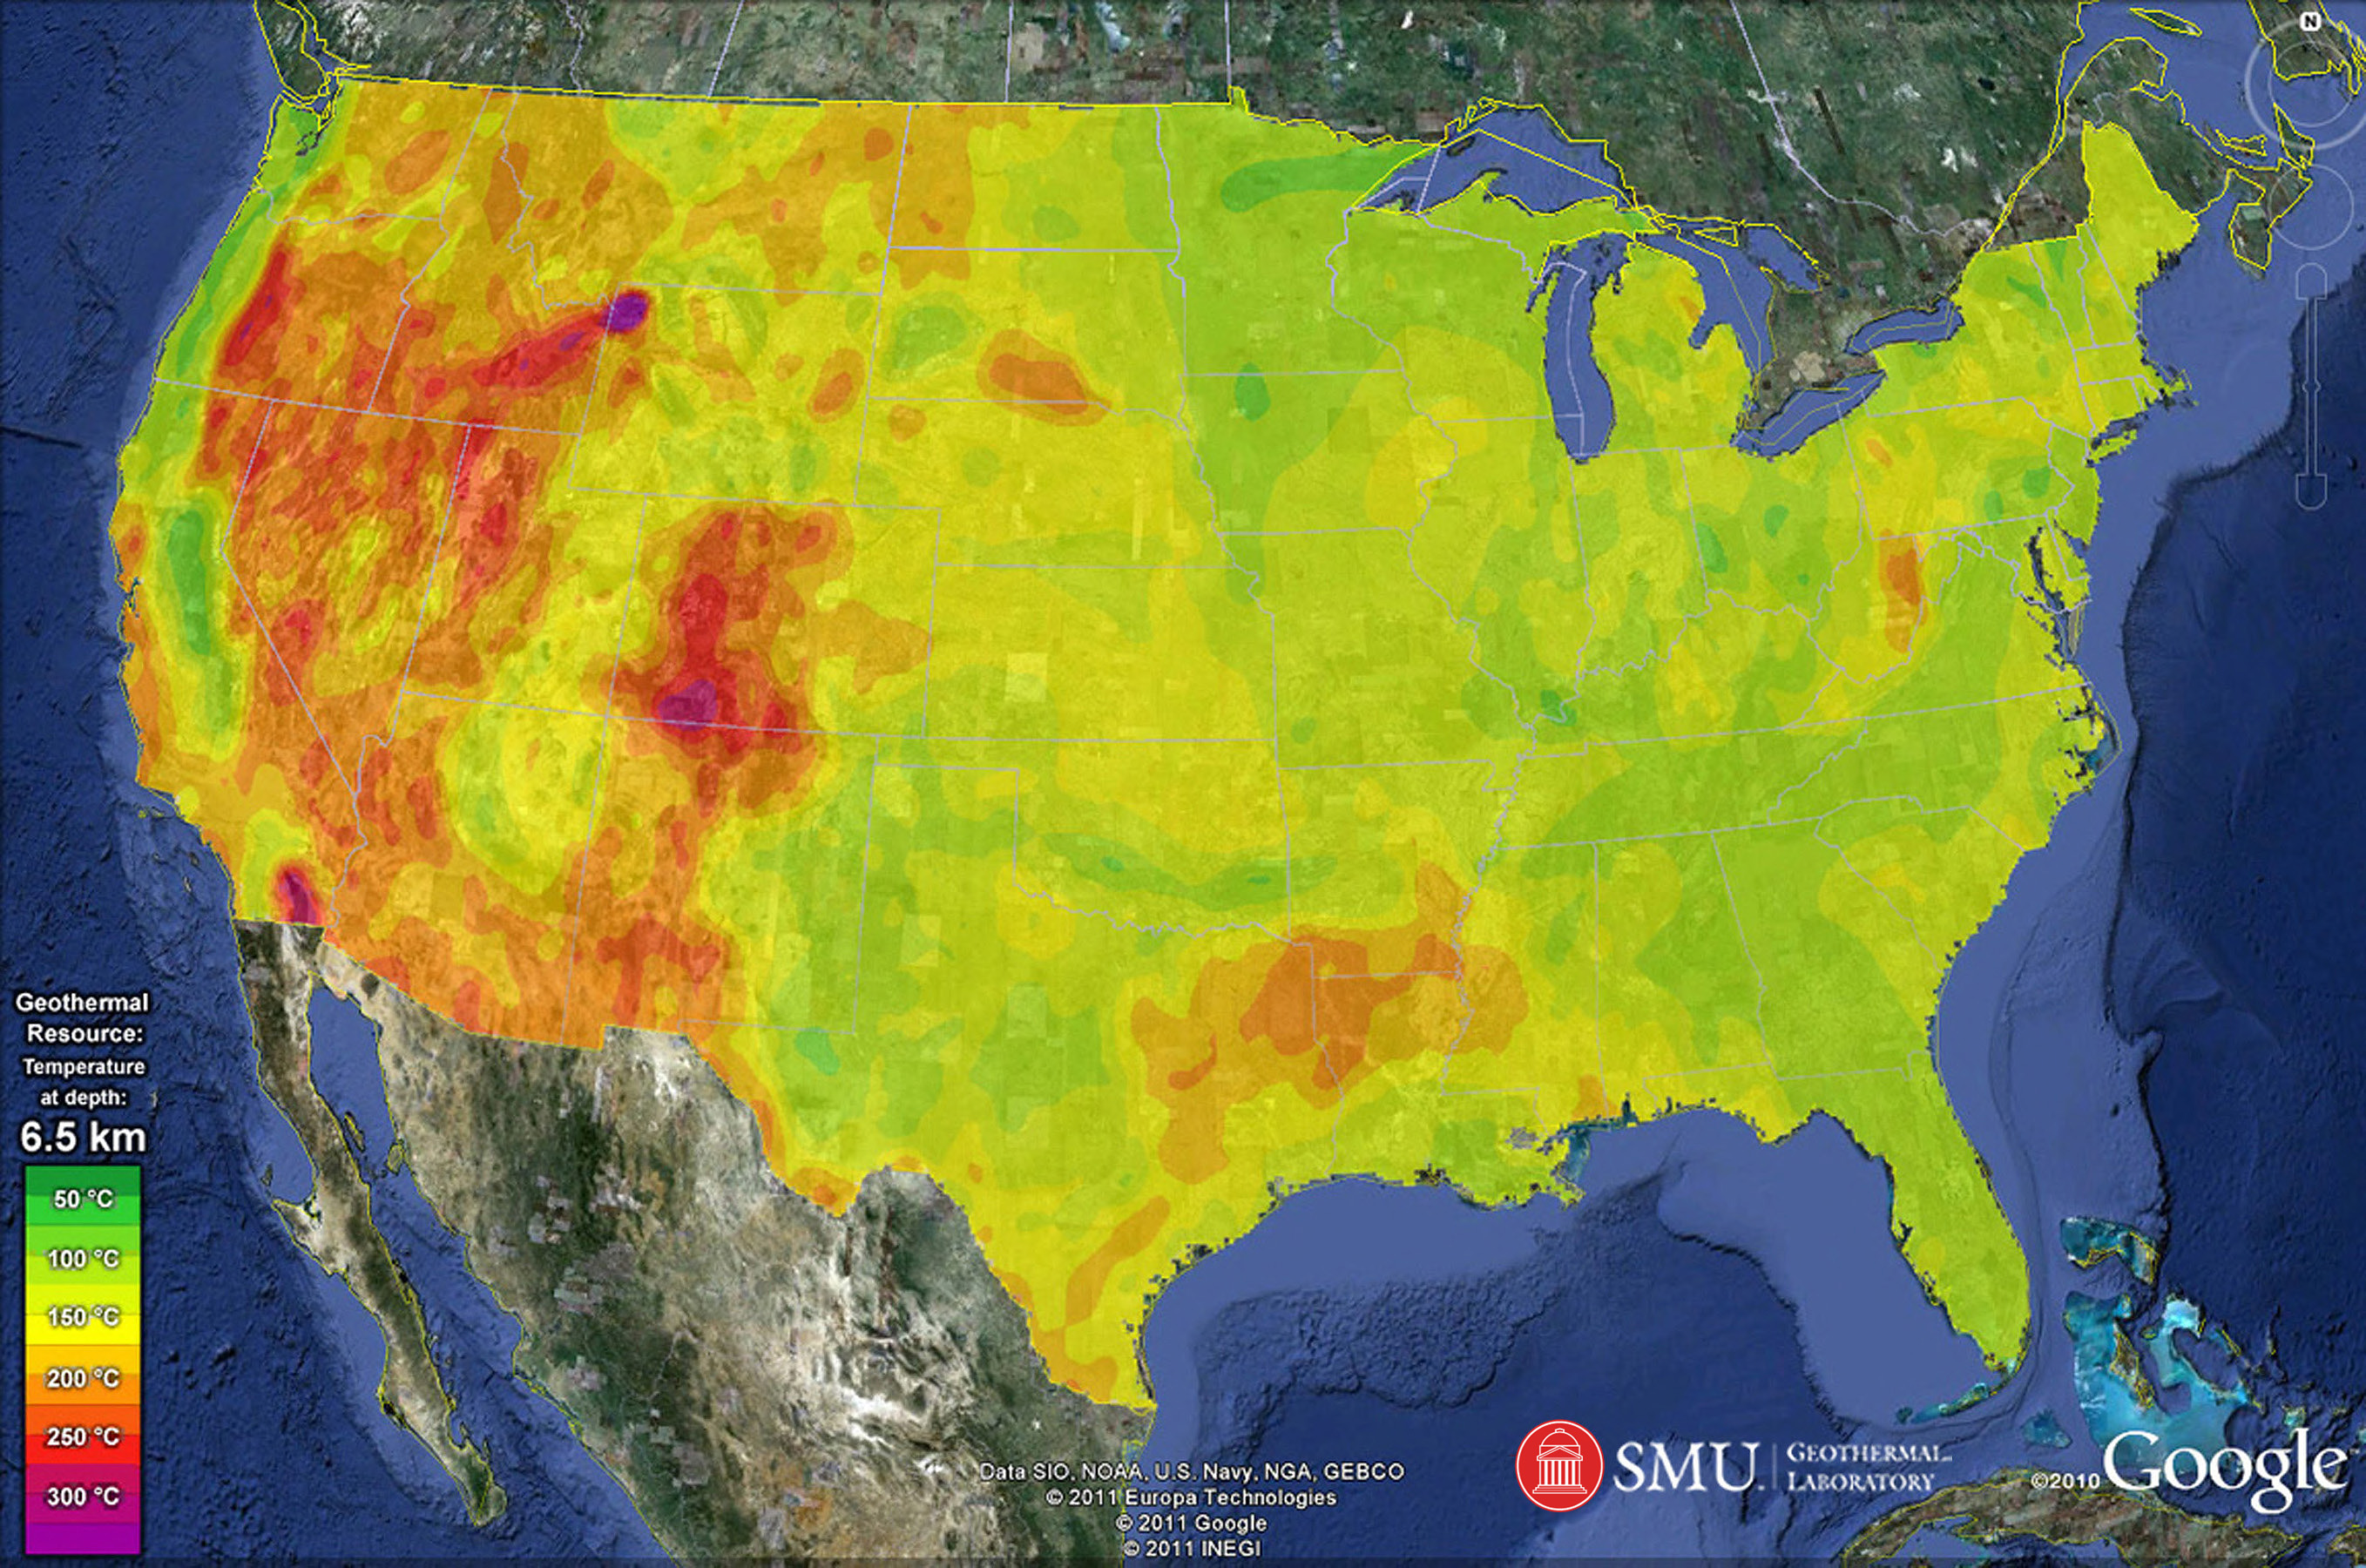 Smu’s David Blackwell Touts Nationwide Geothermal Energy Potential At